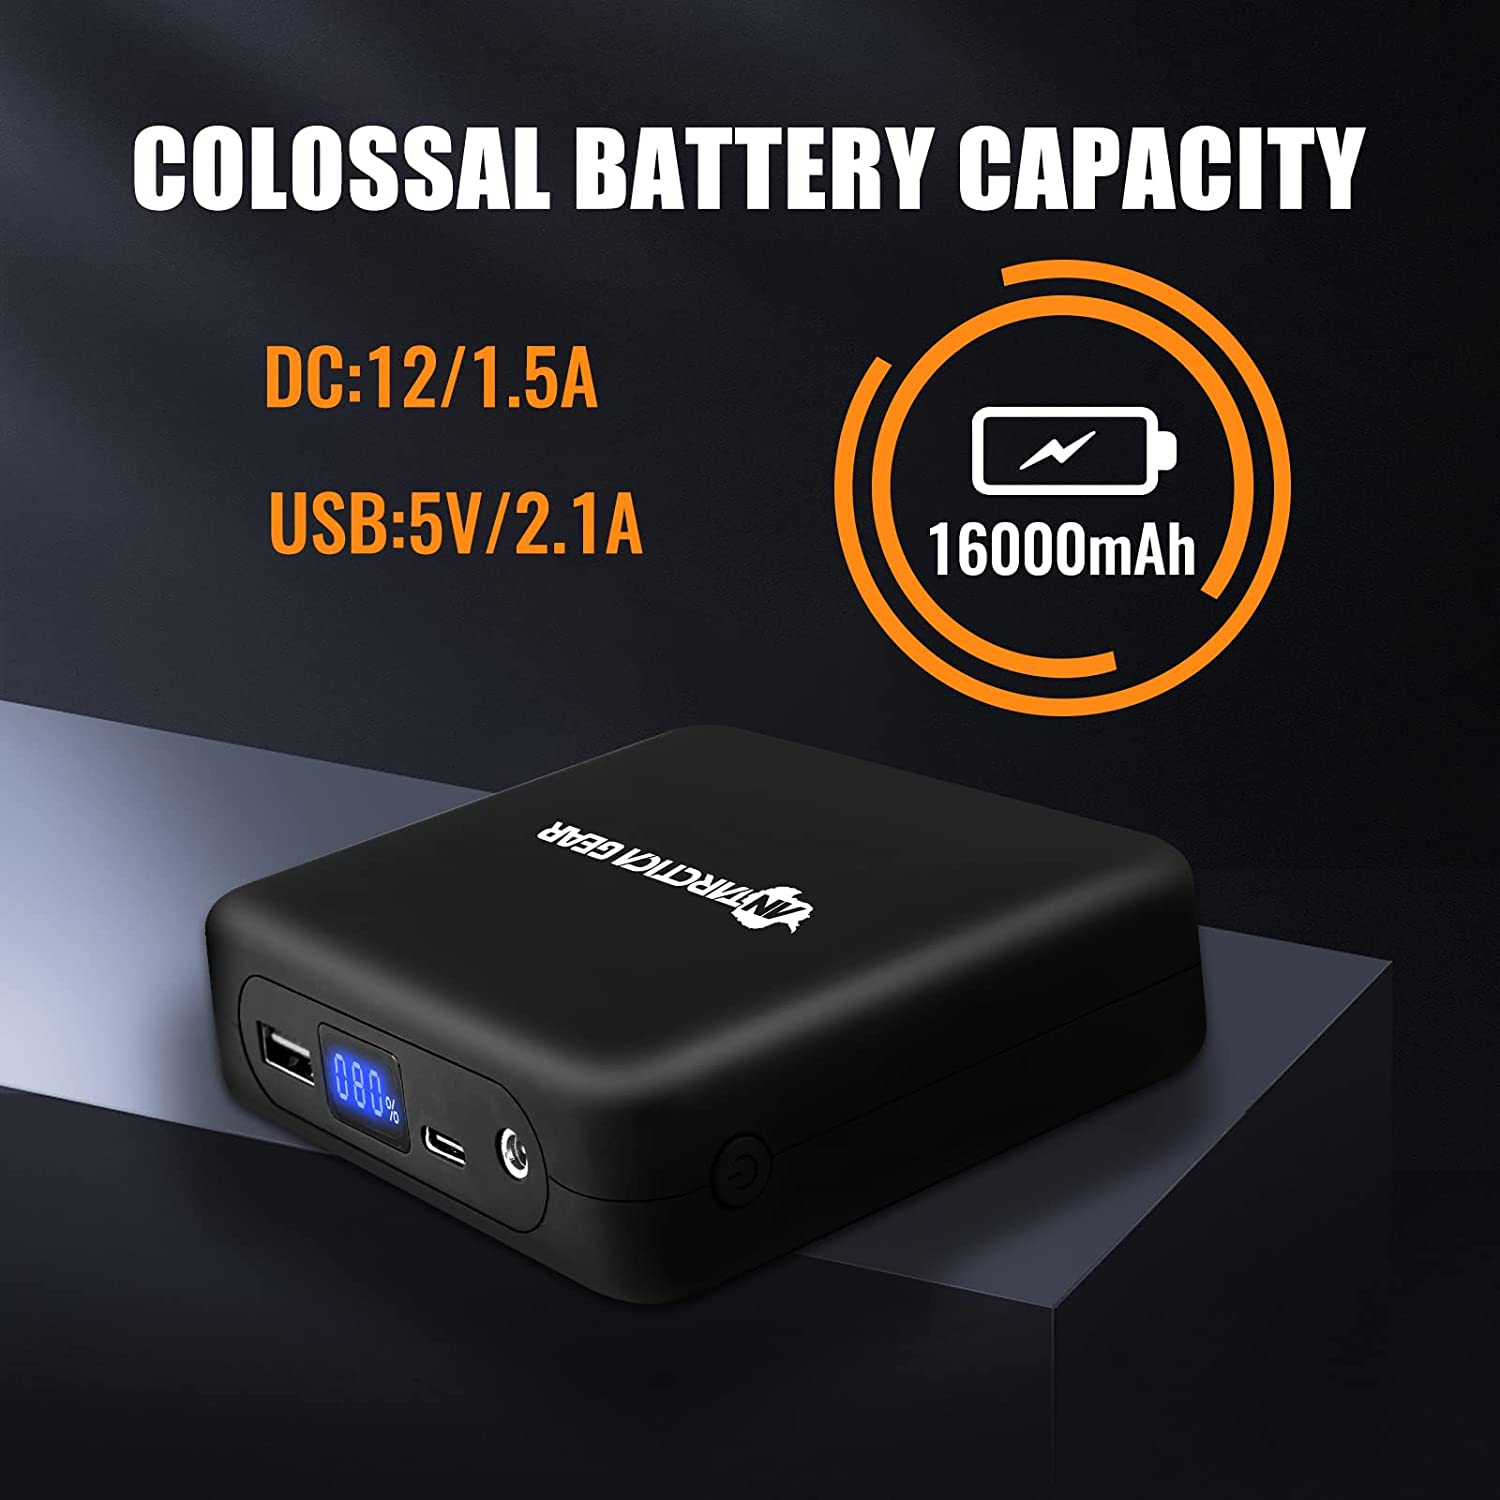 ANTARCTICA GEAR Portable Battery Power Bank 12V 16000mAh for Heated Jackets, Phone Battery Pack with LED Display